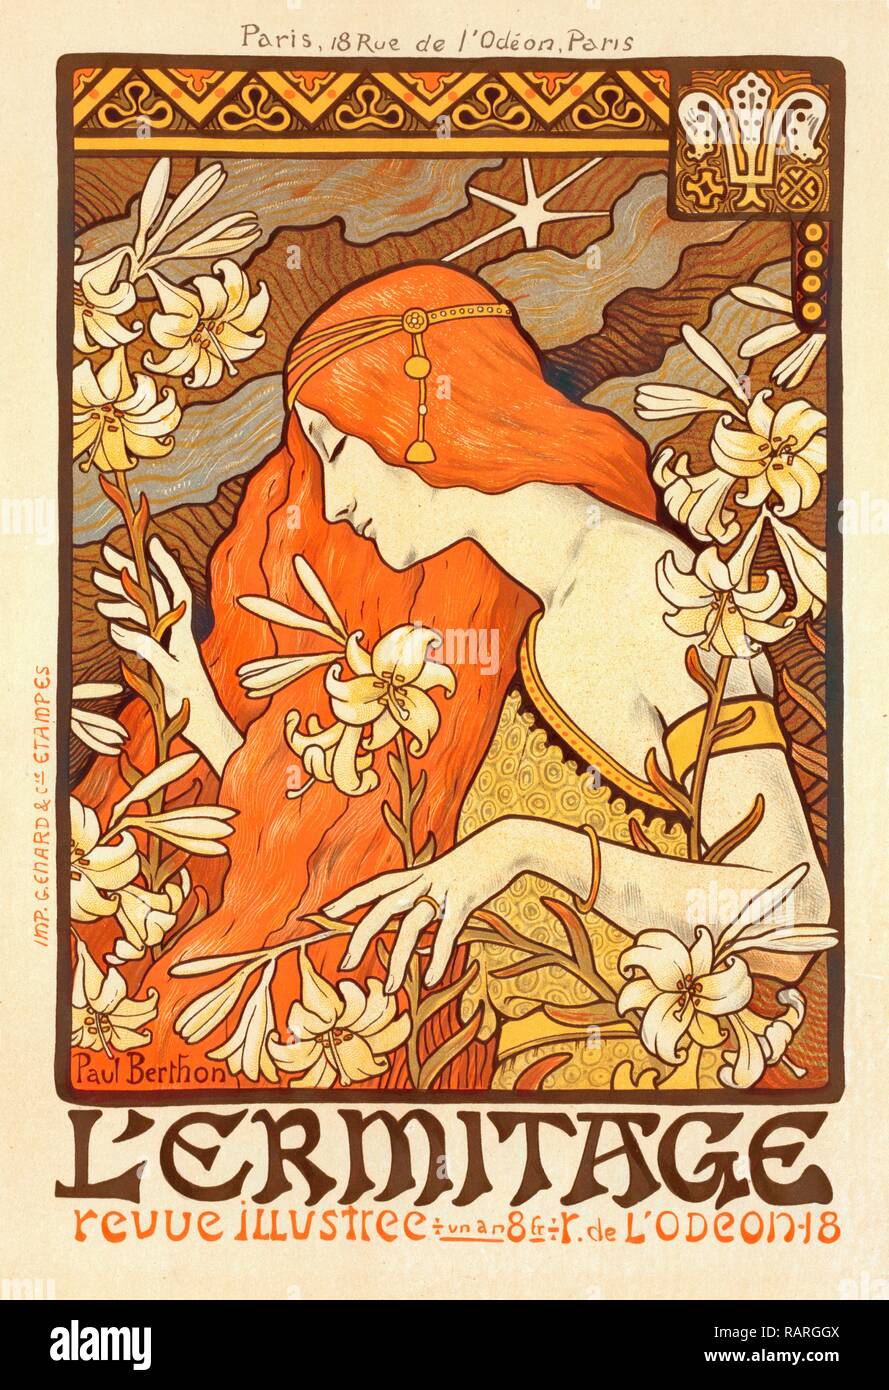 Poster for la Revue l'Érmitage. Berthon, Paul (1872-1909), Artist. Reimagined by Gibon. Classic art with a modern reimagined Stock Photo